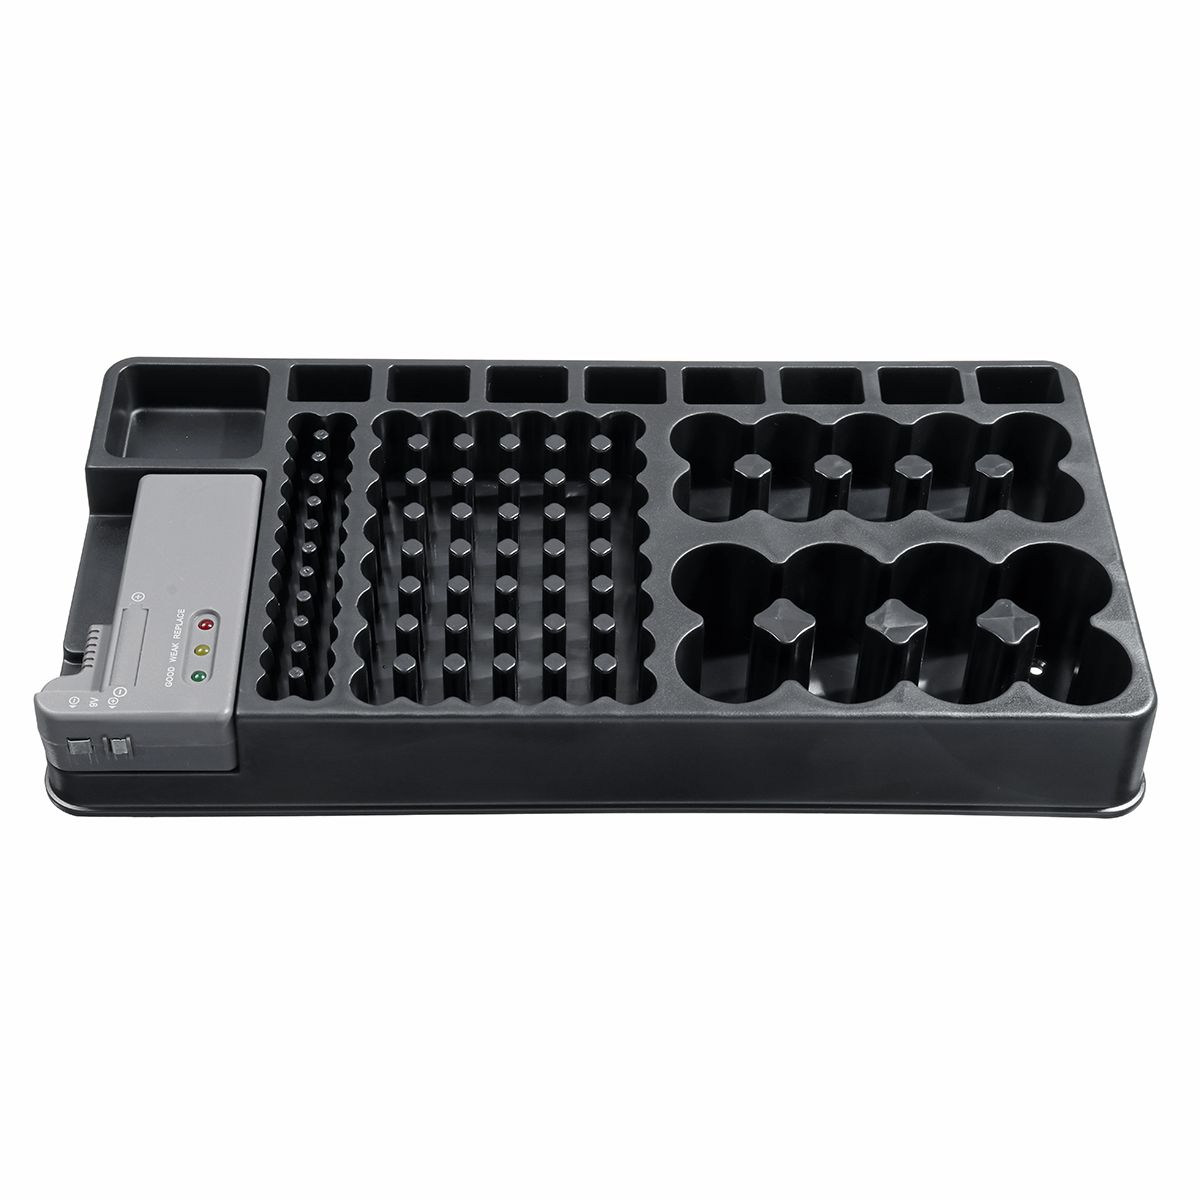 98Grids-Battery-Organizer-Storage-Holder-with-Removable-Battery-Tester-Case-1680274